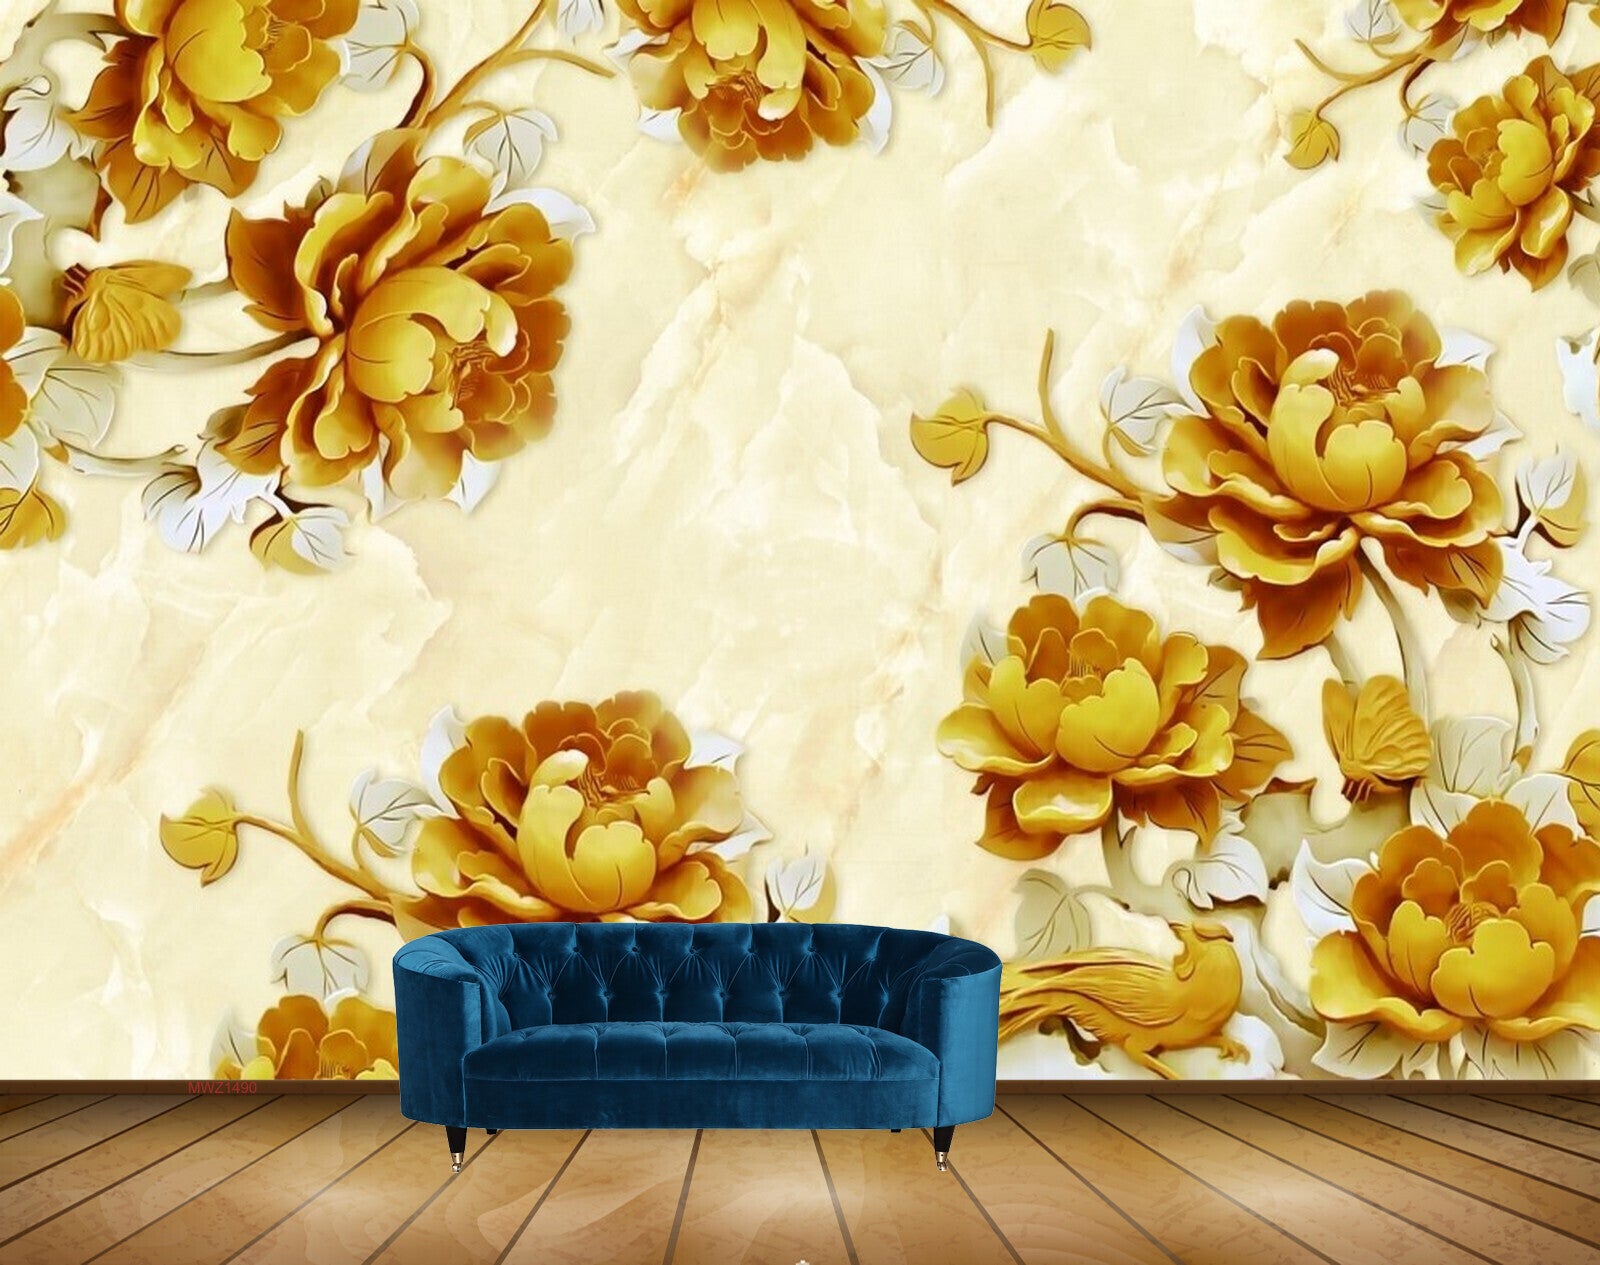 Compendium 2  Golden Pheasant wallcovering from Nilaya by Asian Paints